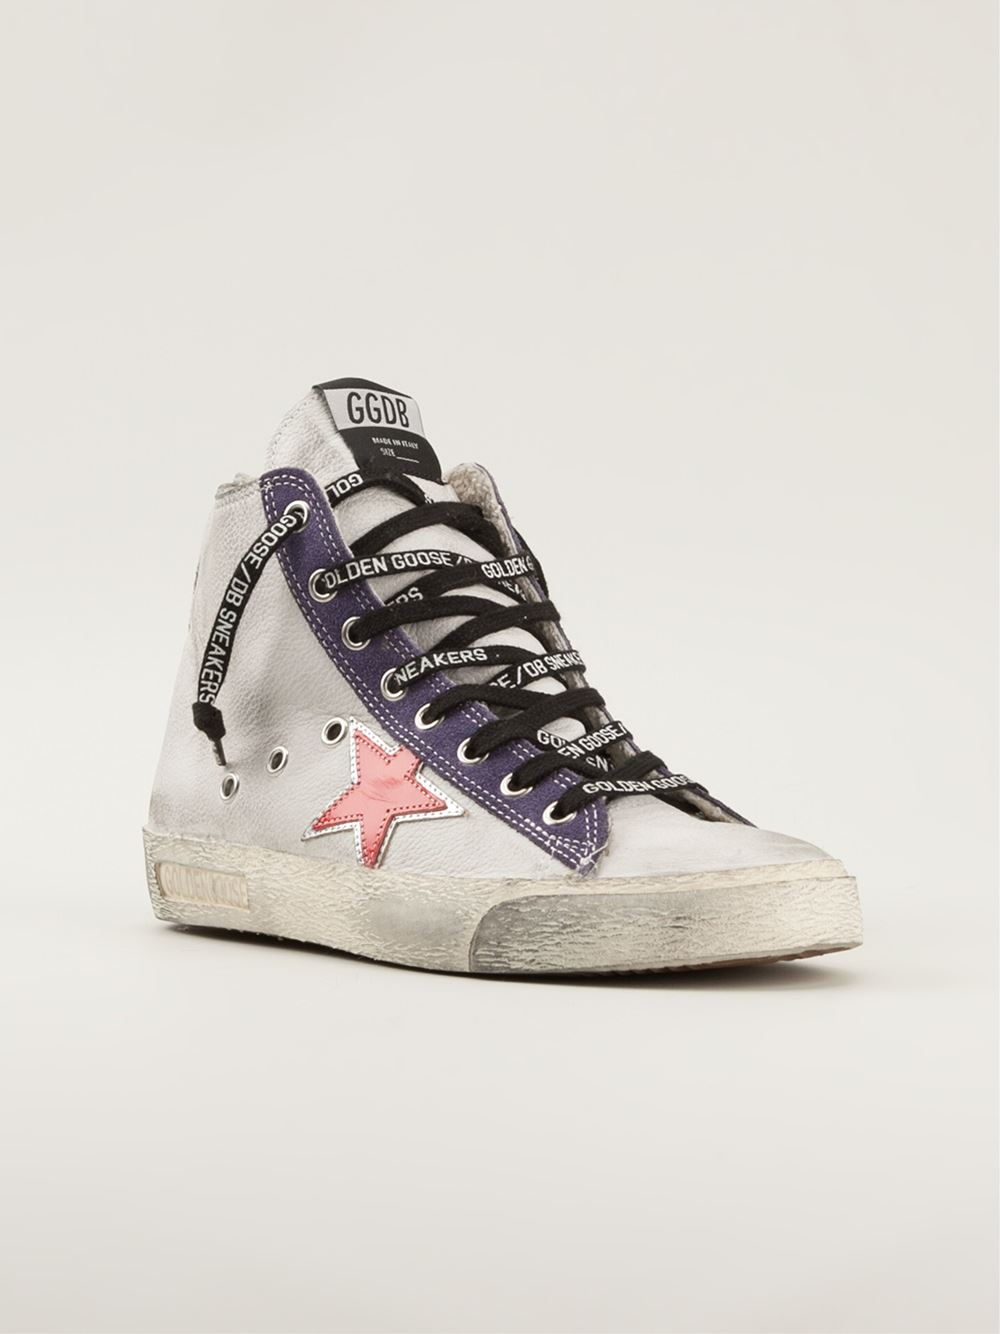 Golden goose deluxe brand High Top Lace Up Sneakers in White | Lyst